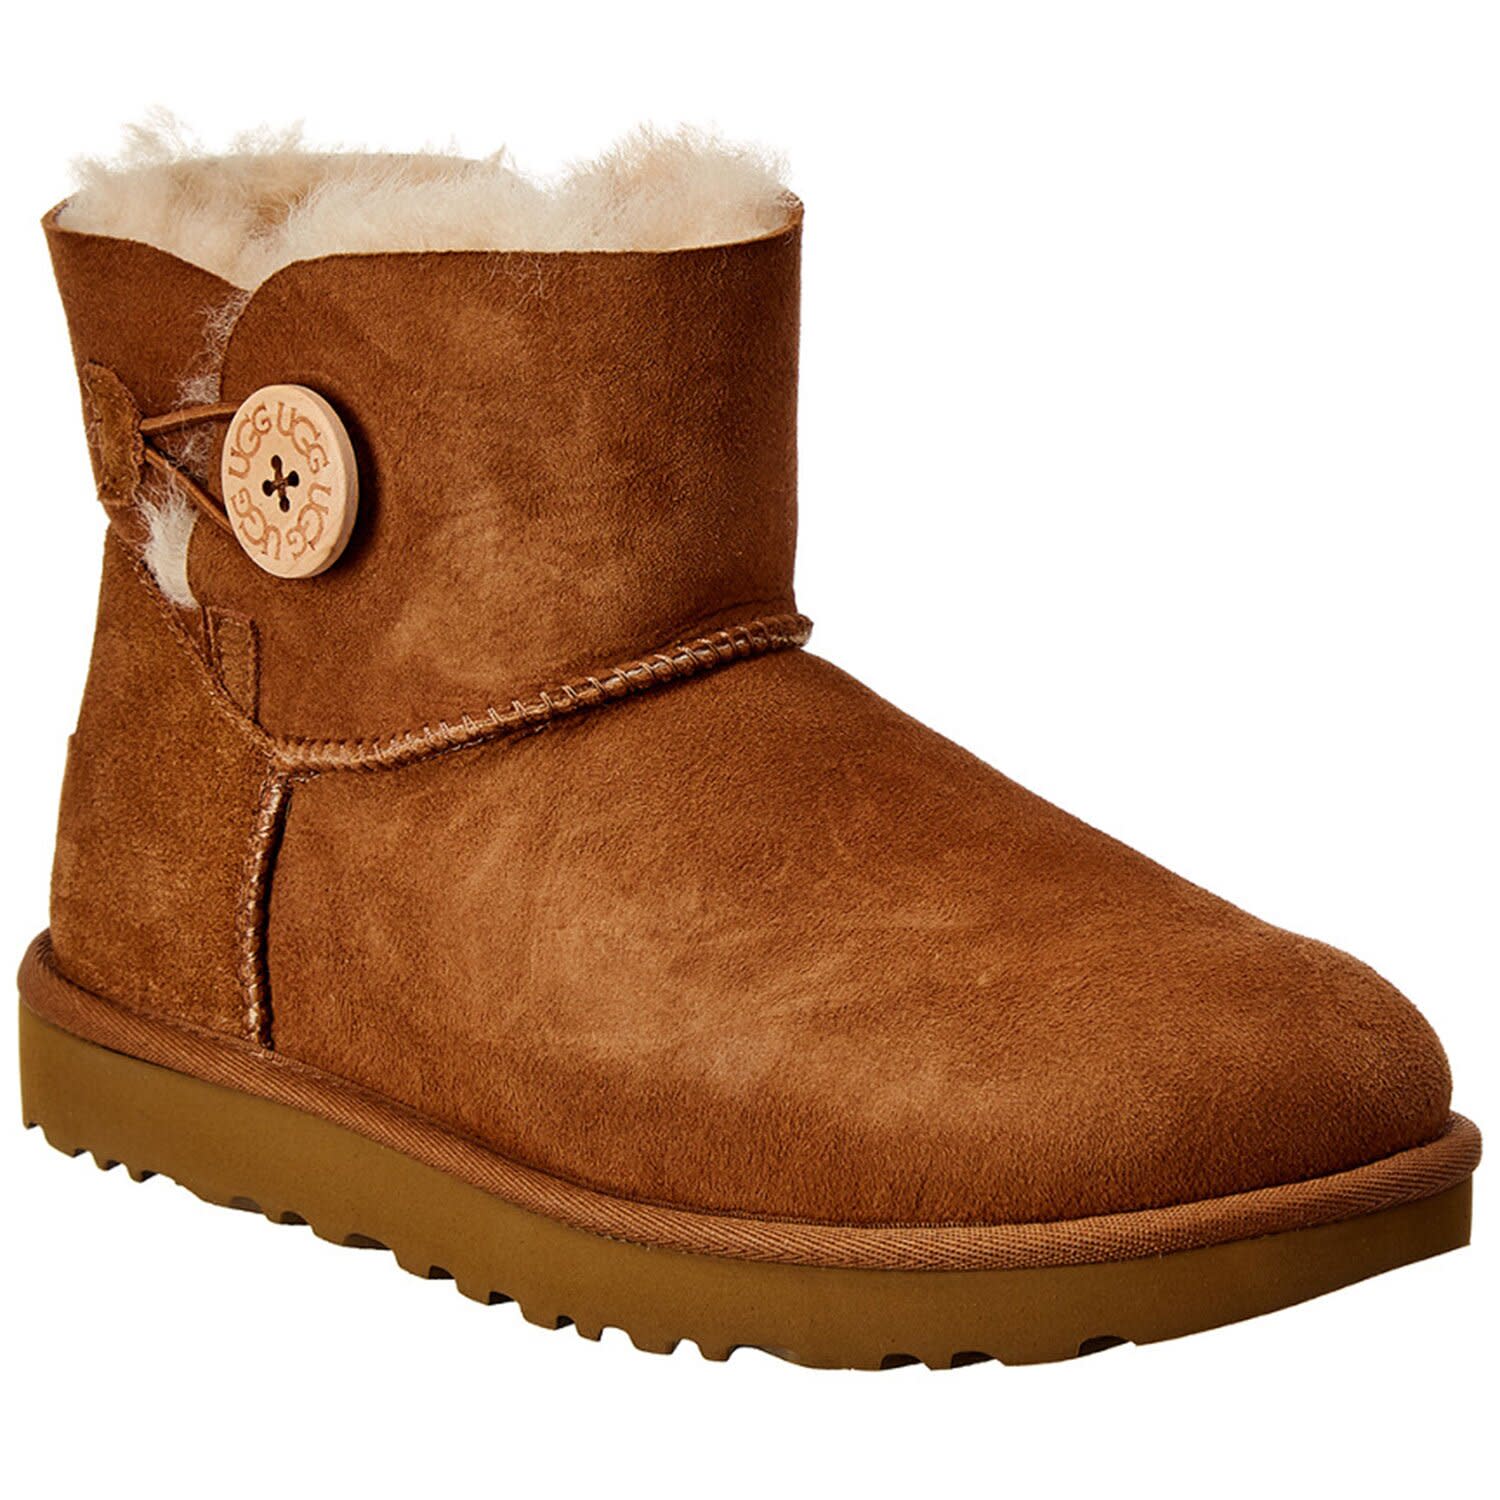 ugg boots for sale near me